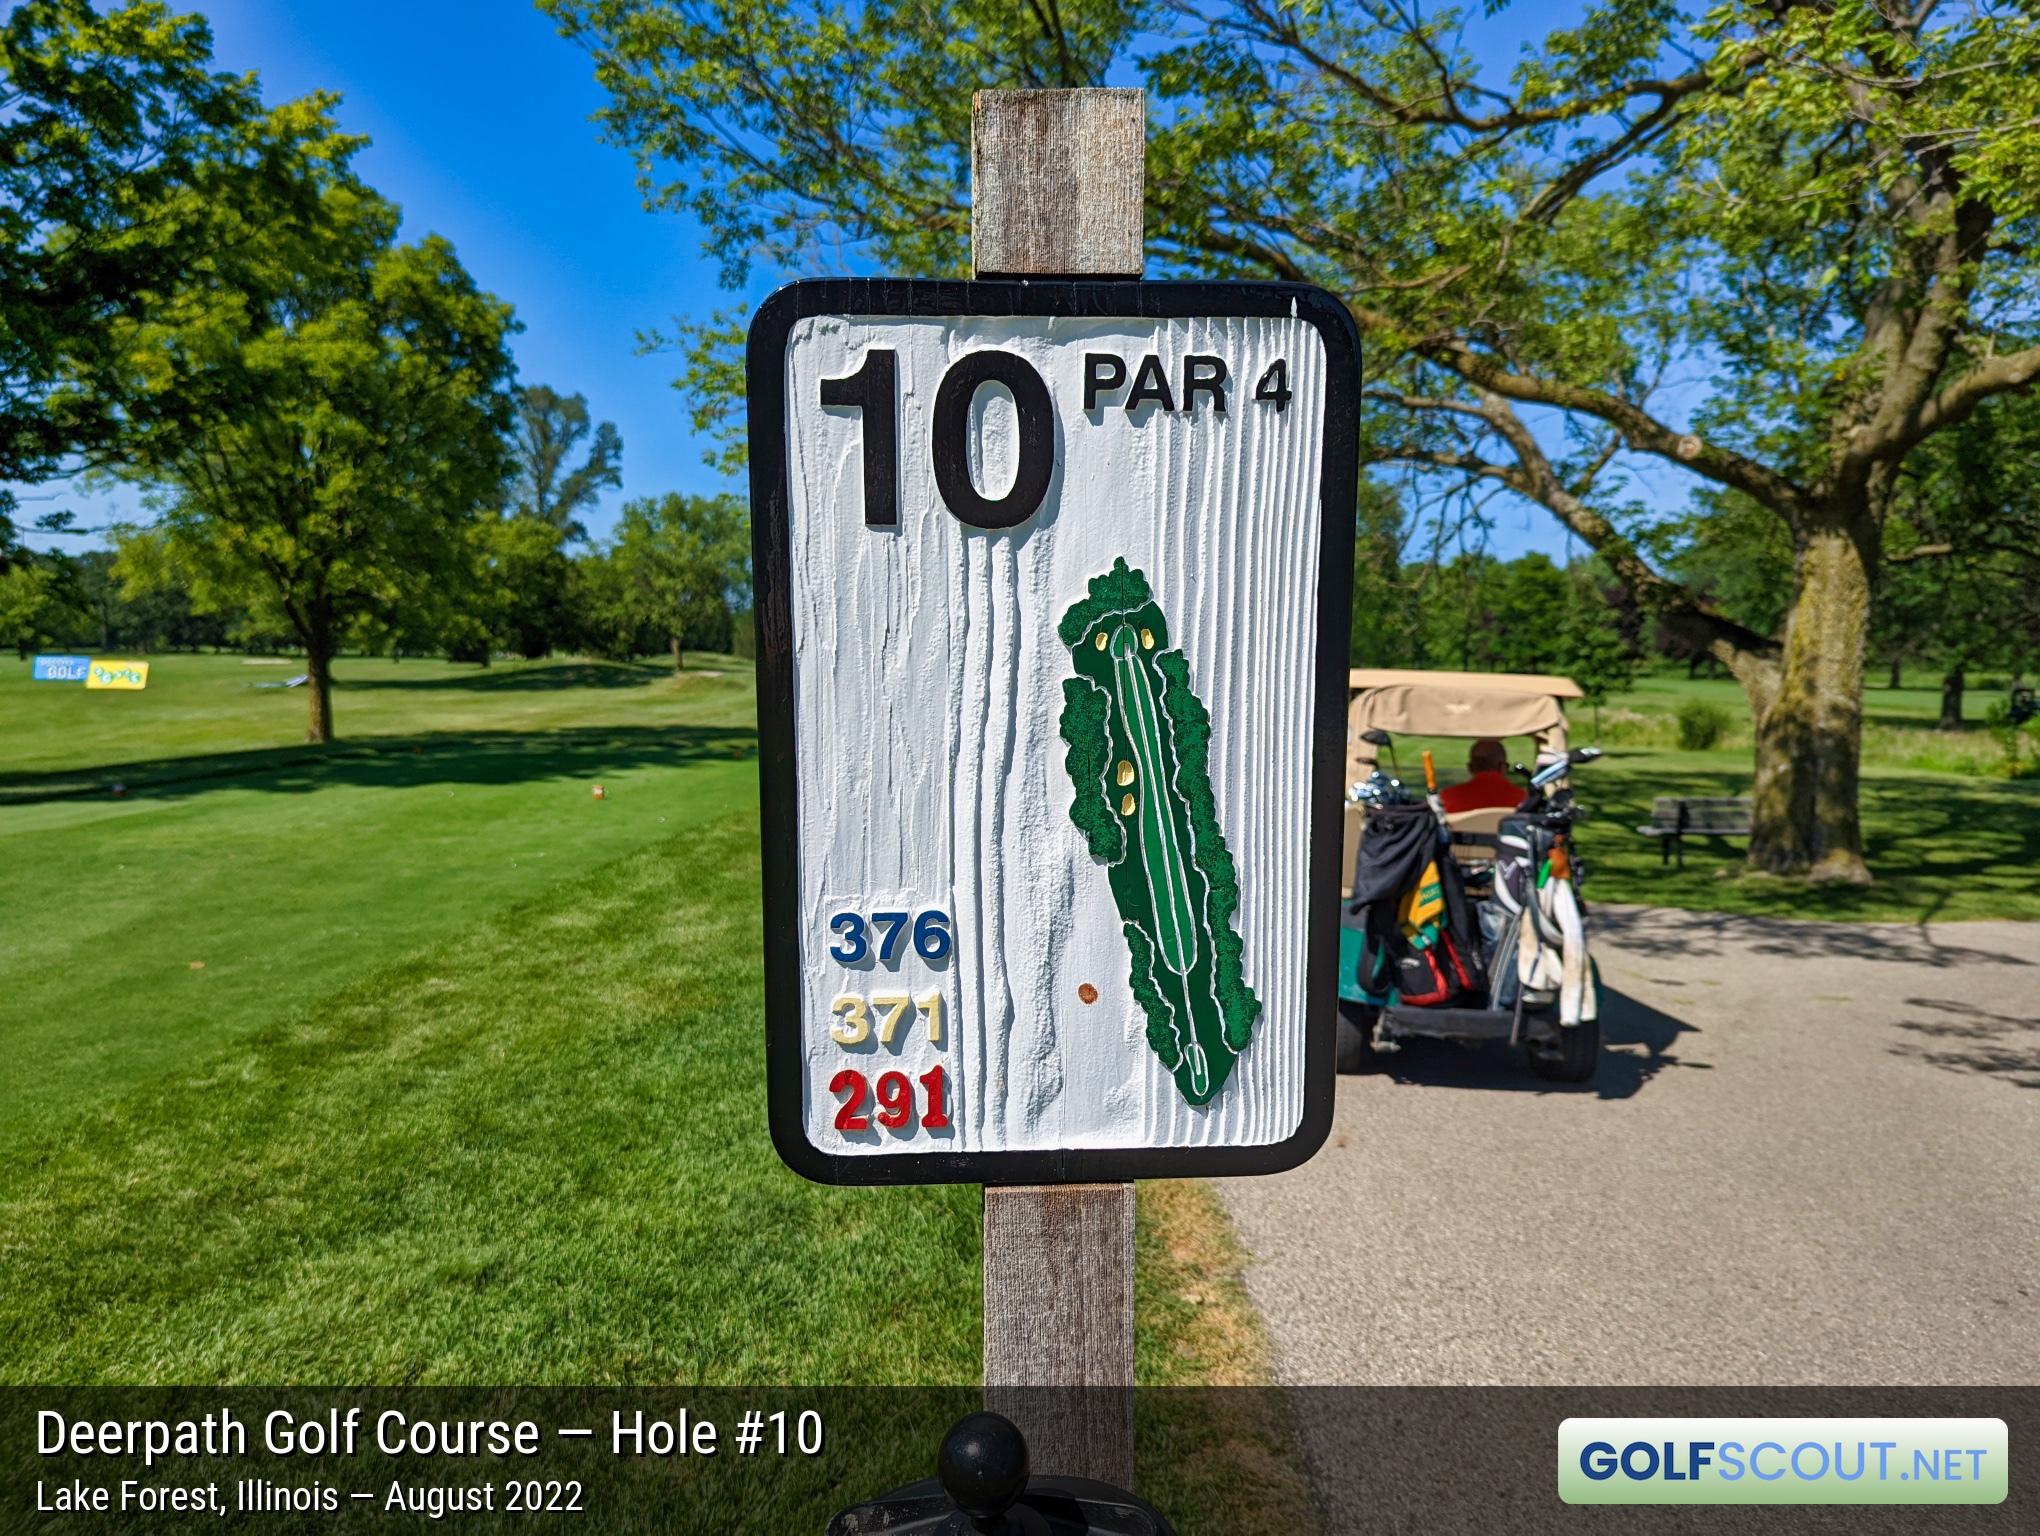 Photo of hole #10 at Deerpath Golf Course in Lake Forest, Illinois. 